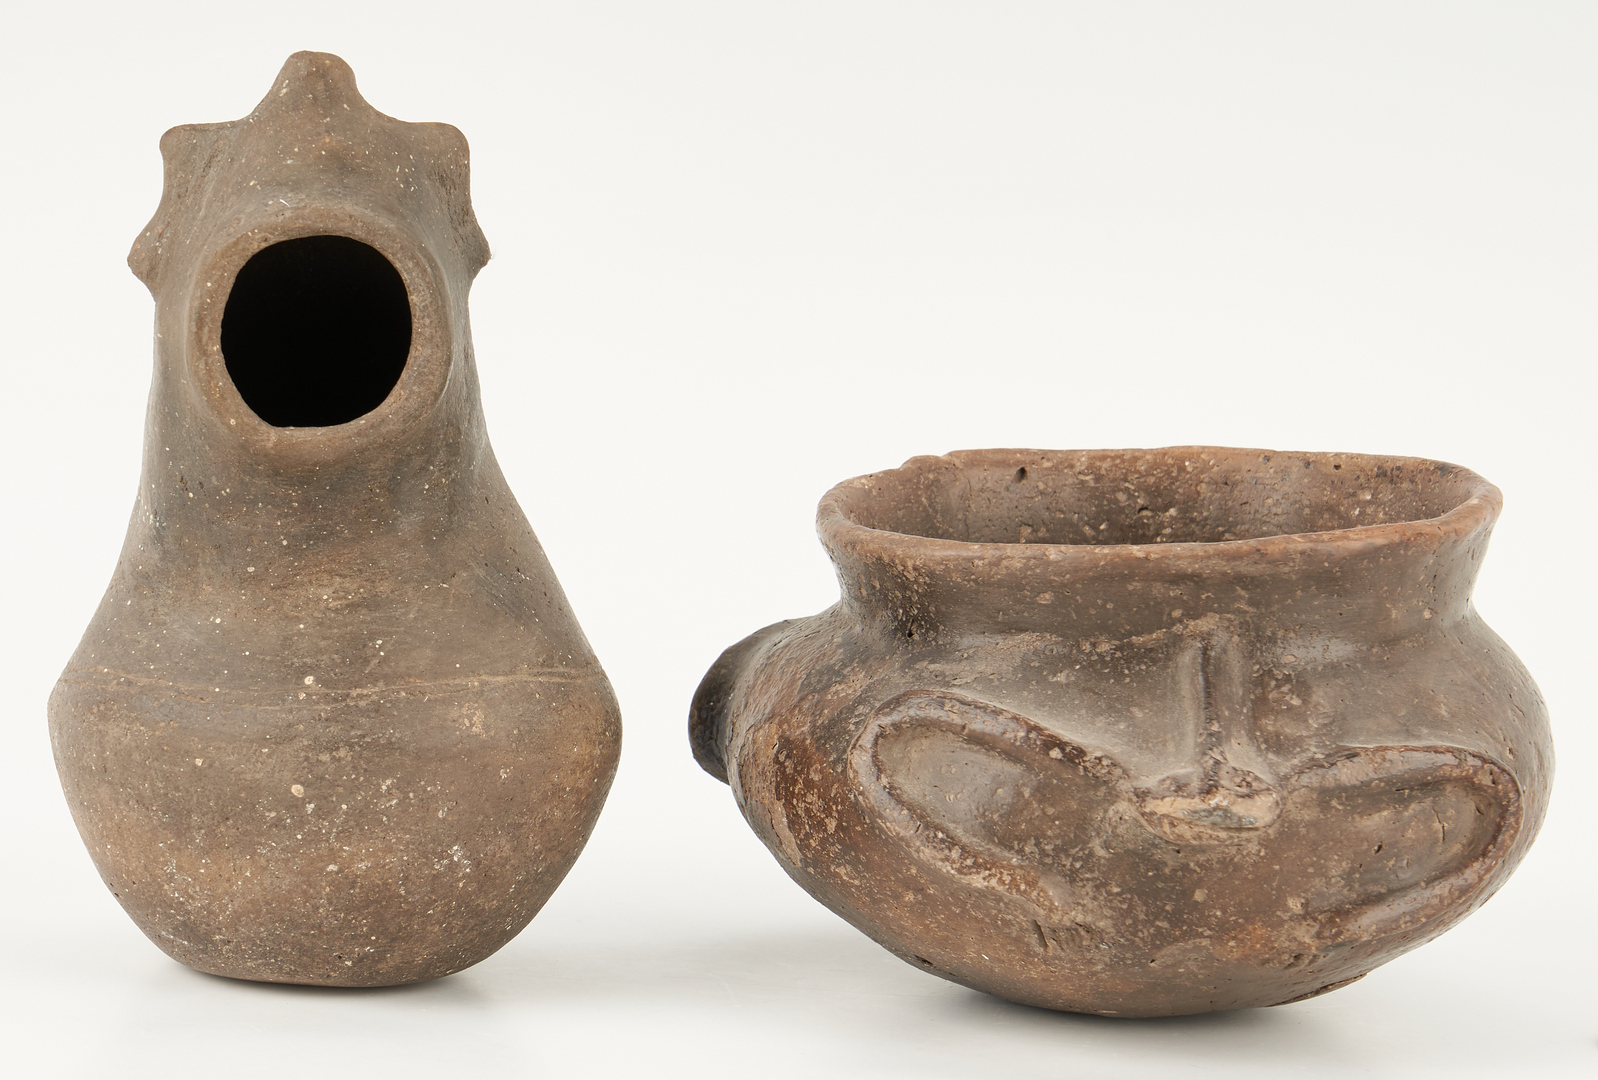 Lot 1116: 2 Mississippian Culture Caddo Effigy Pottery Items